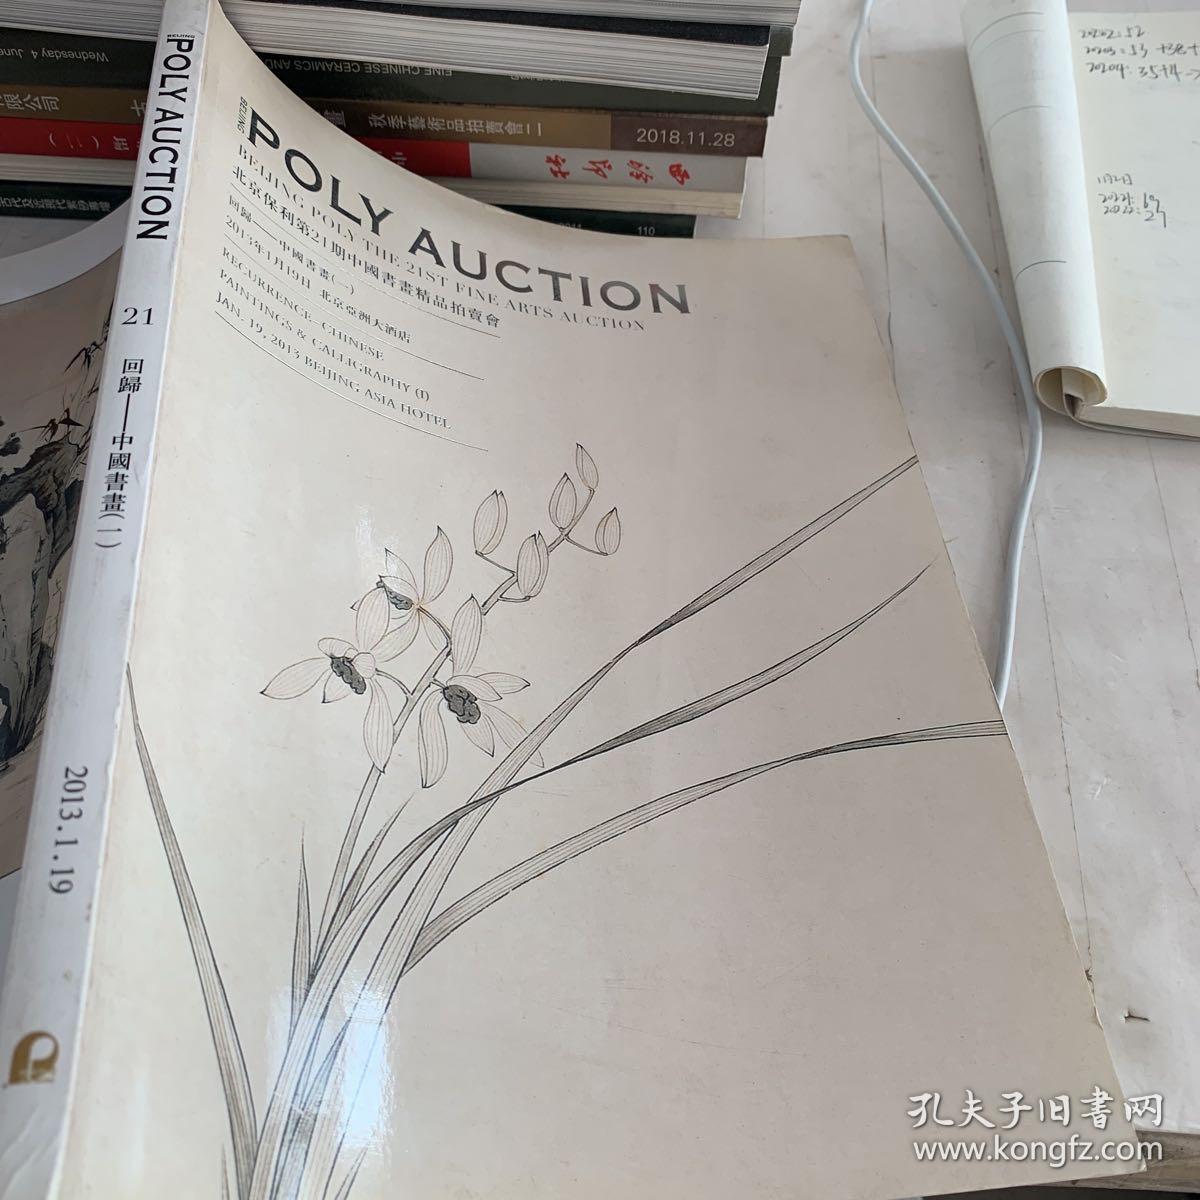 poly auction